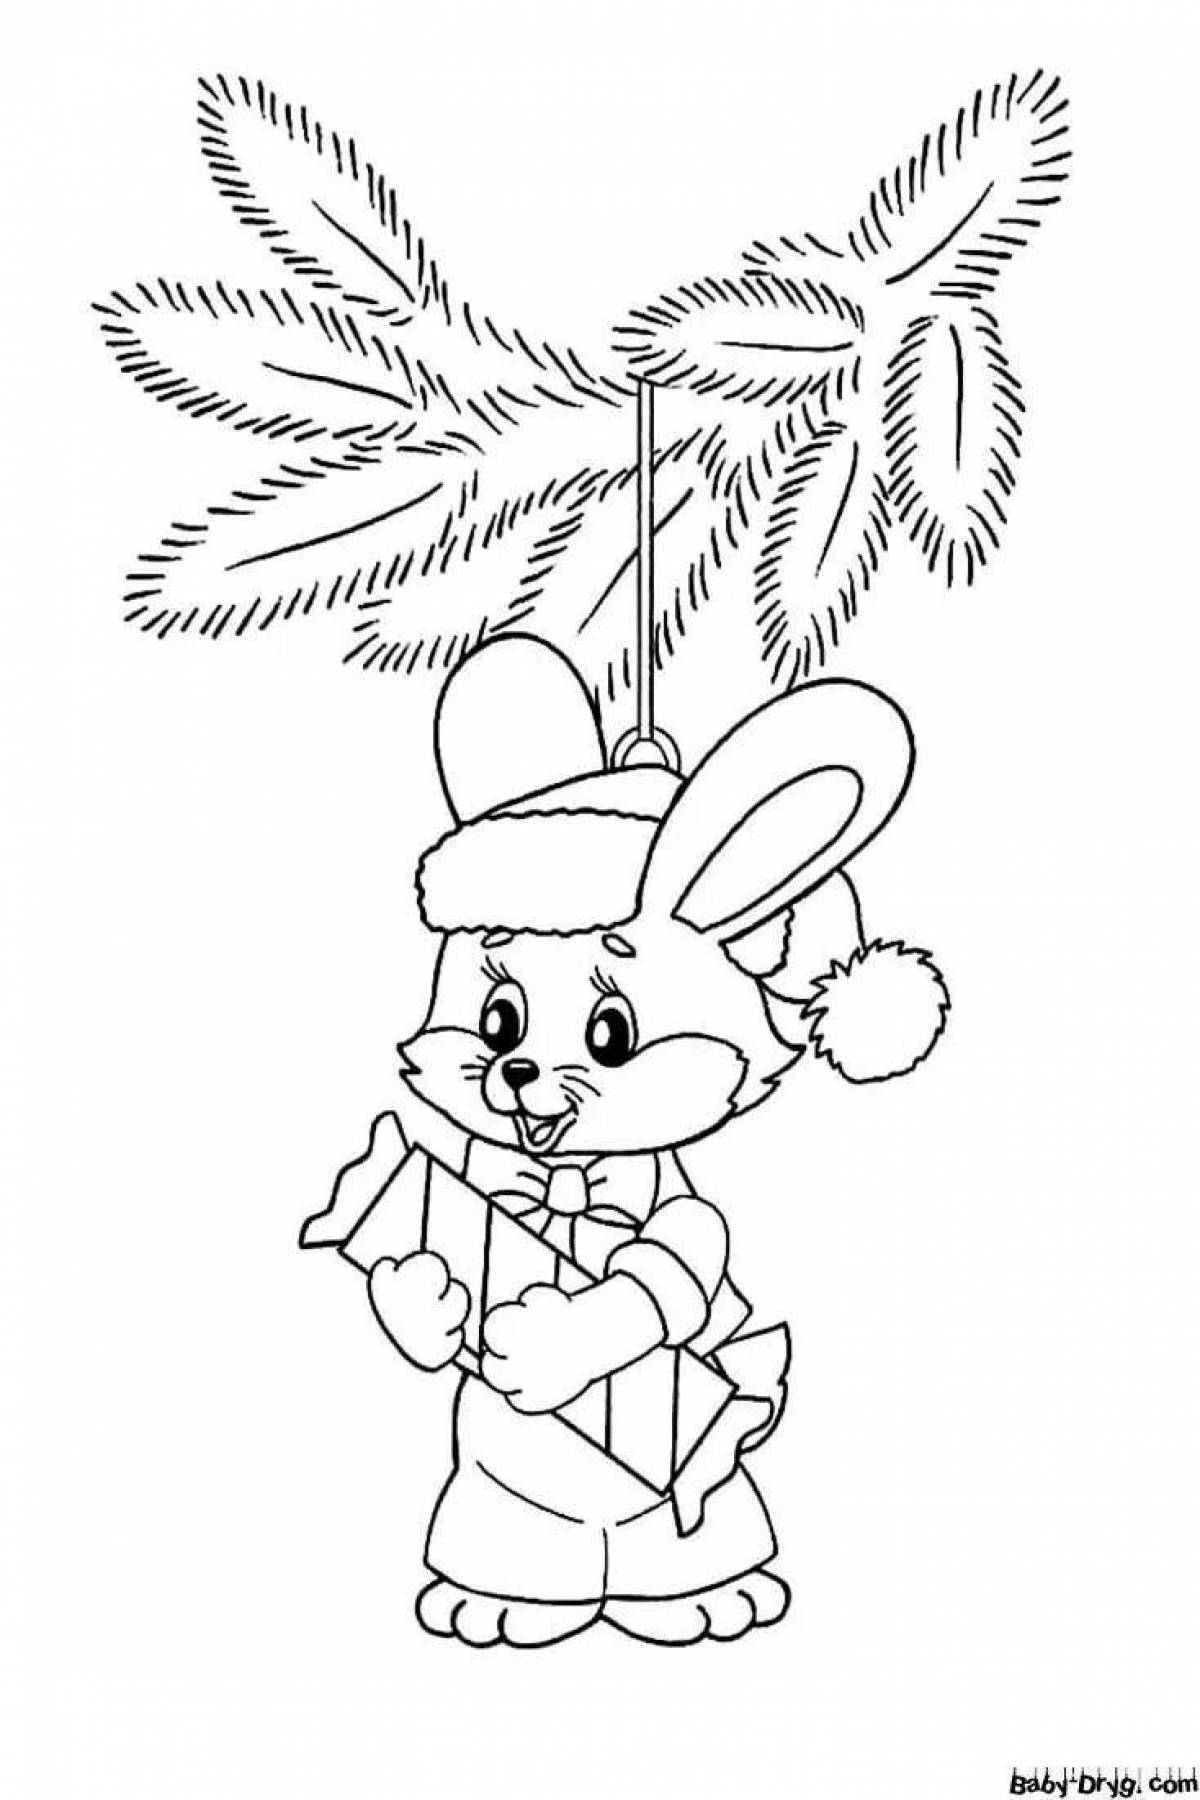 Coloring book cheerful New Year rabbit